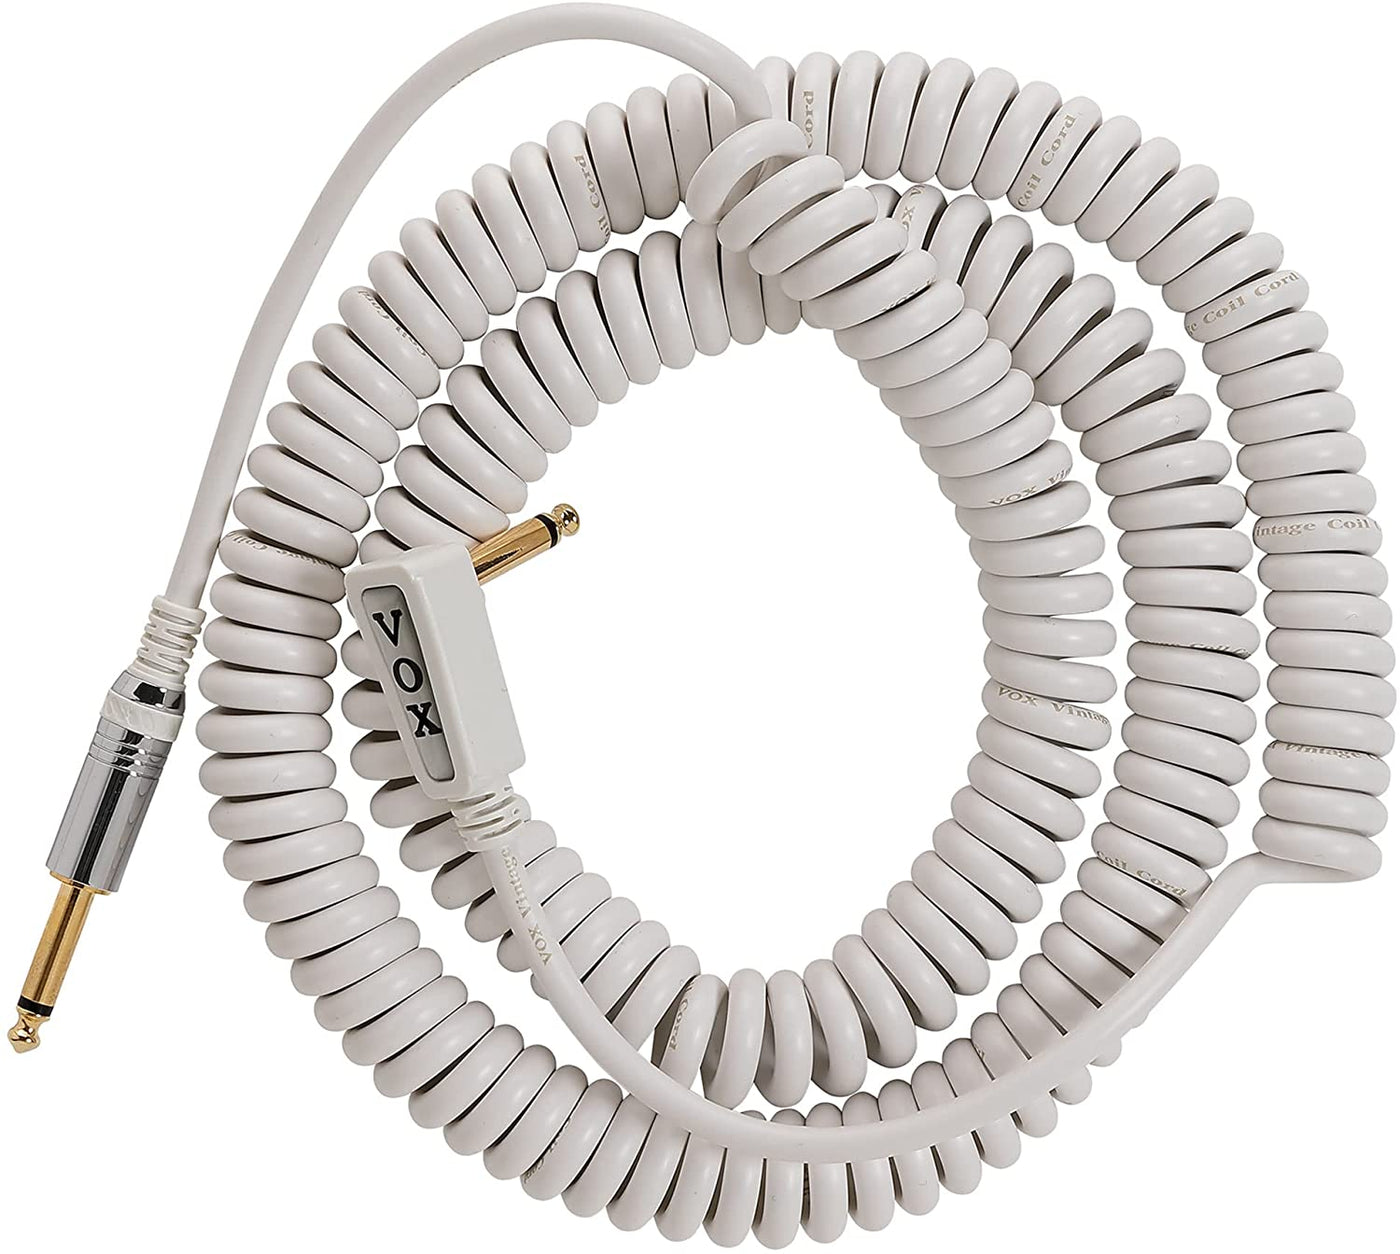 White Vintage Coiled Cable 9m w/Mesh Bag